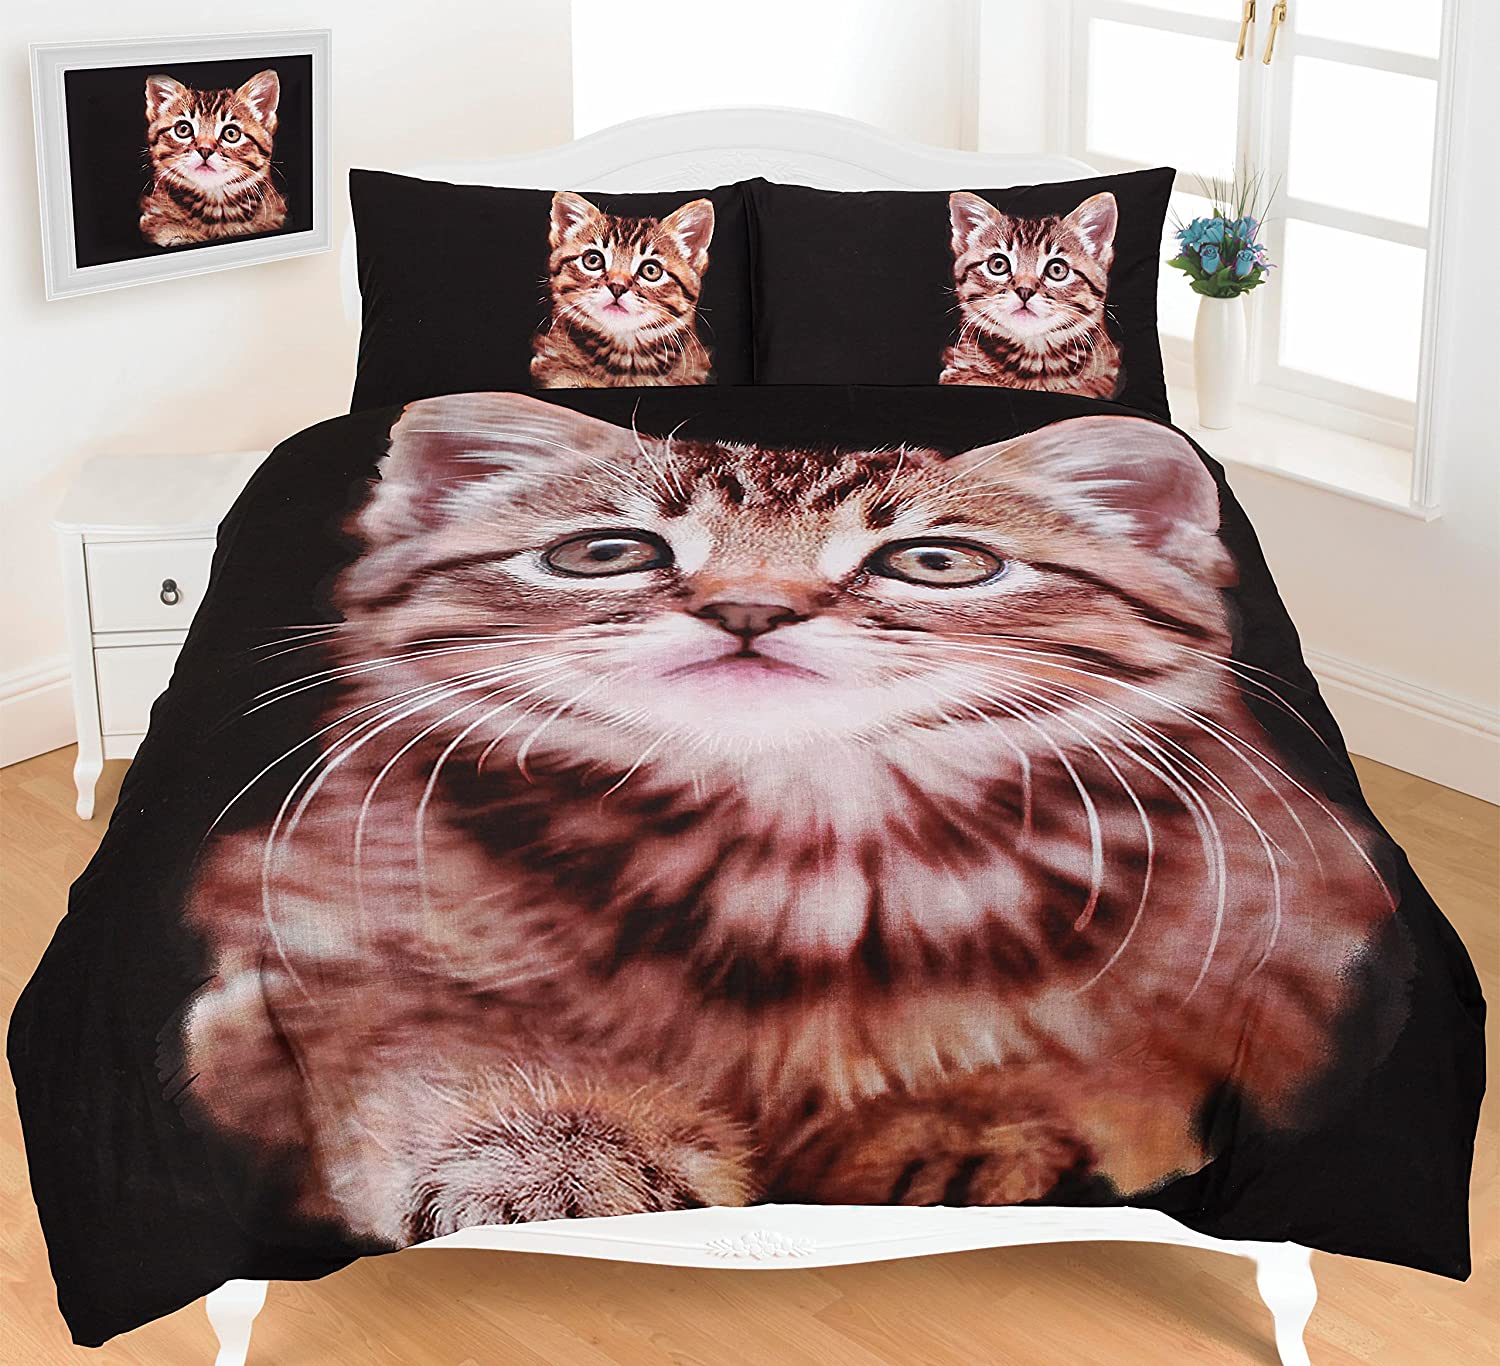 Kitten Stretch 3D Duvet Cover Sets With Pillowcases - Poly Cotton Fabric 3D Bedding